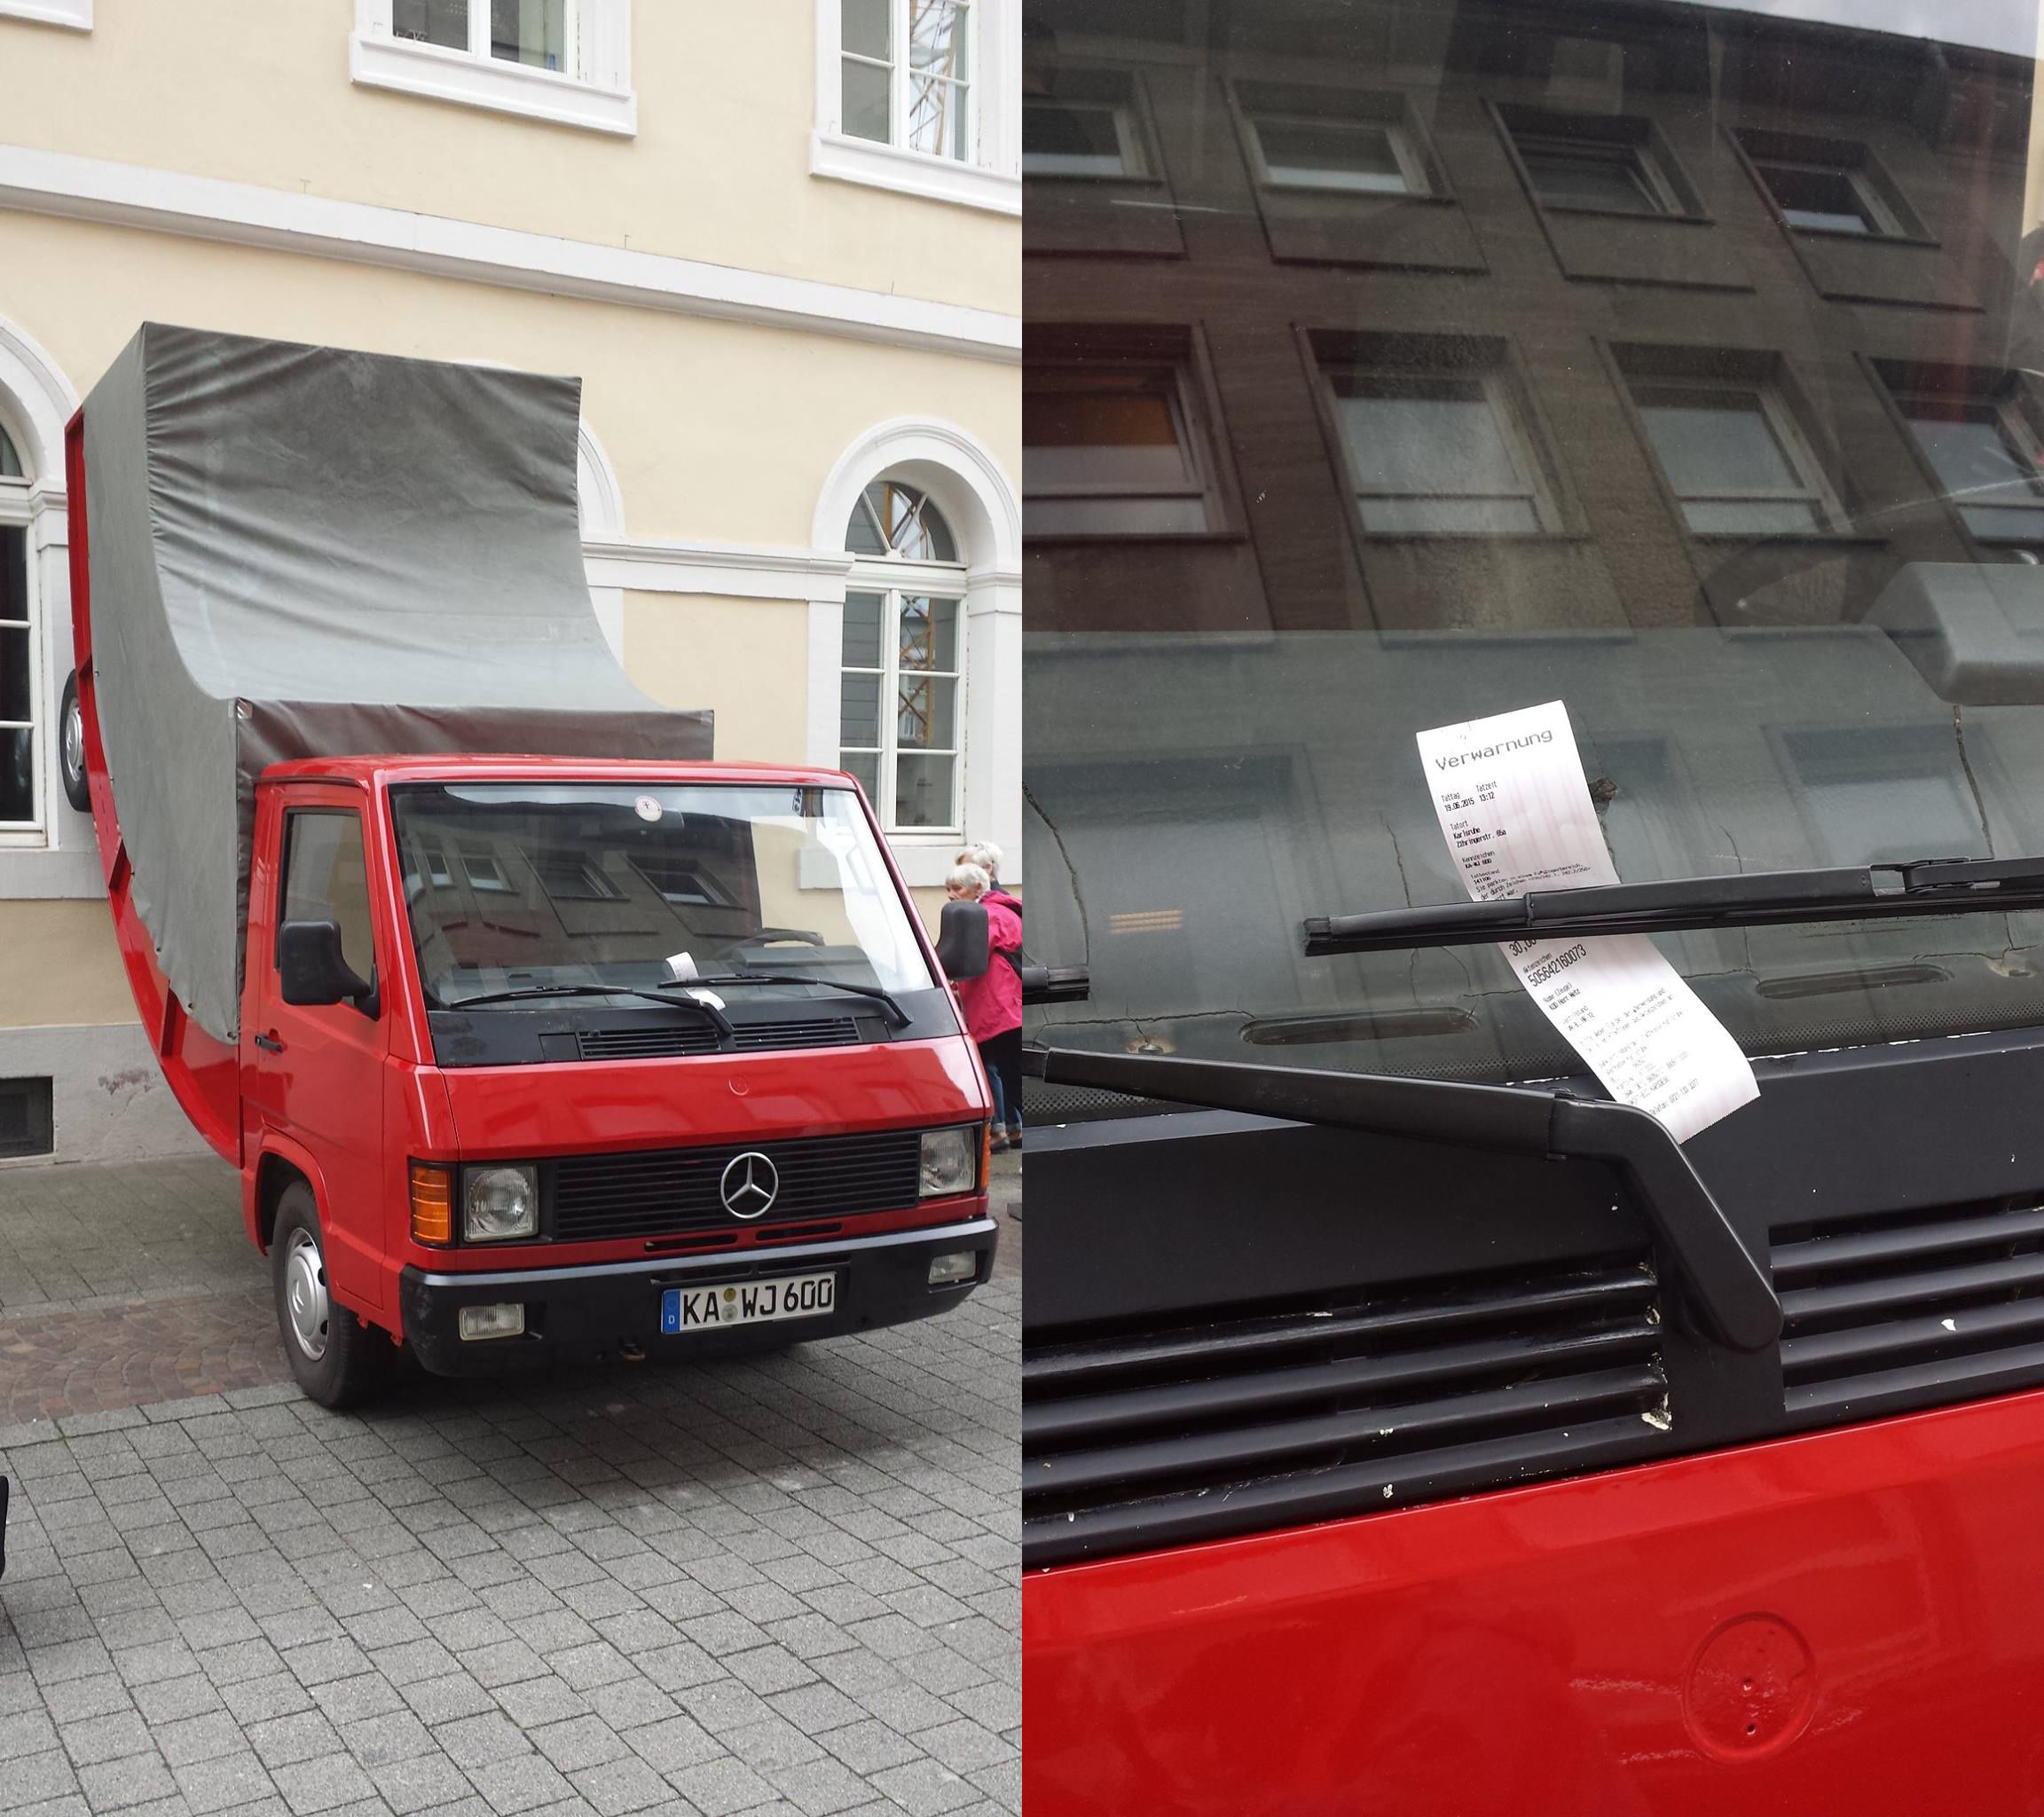 German city of Karlsruhe just issued a parking ticket to Austrian artist Erwin Wurm for one of his bent car sculptures.